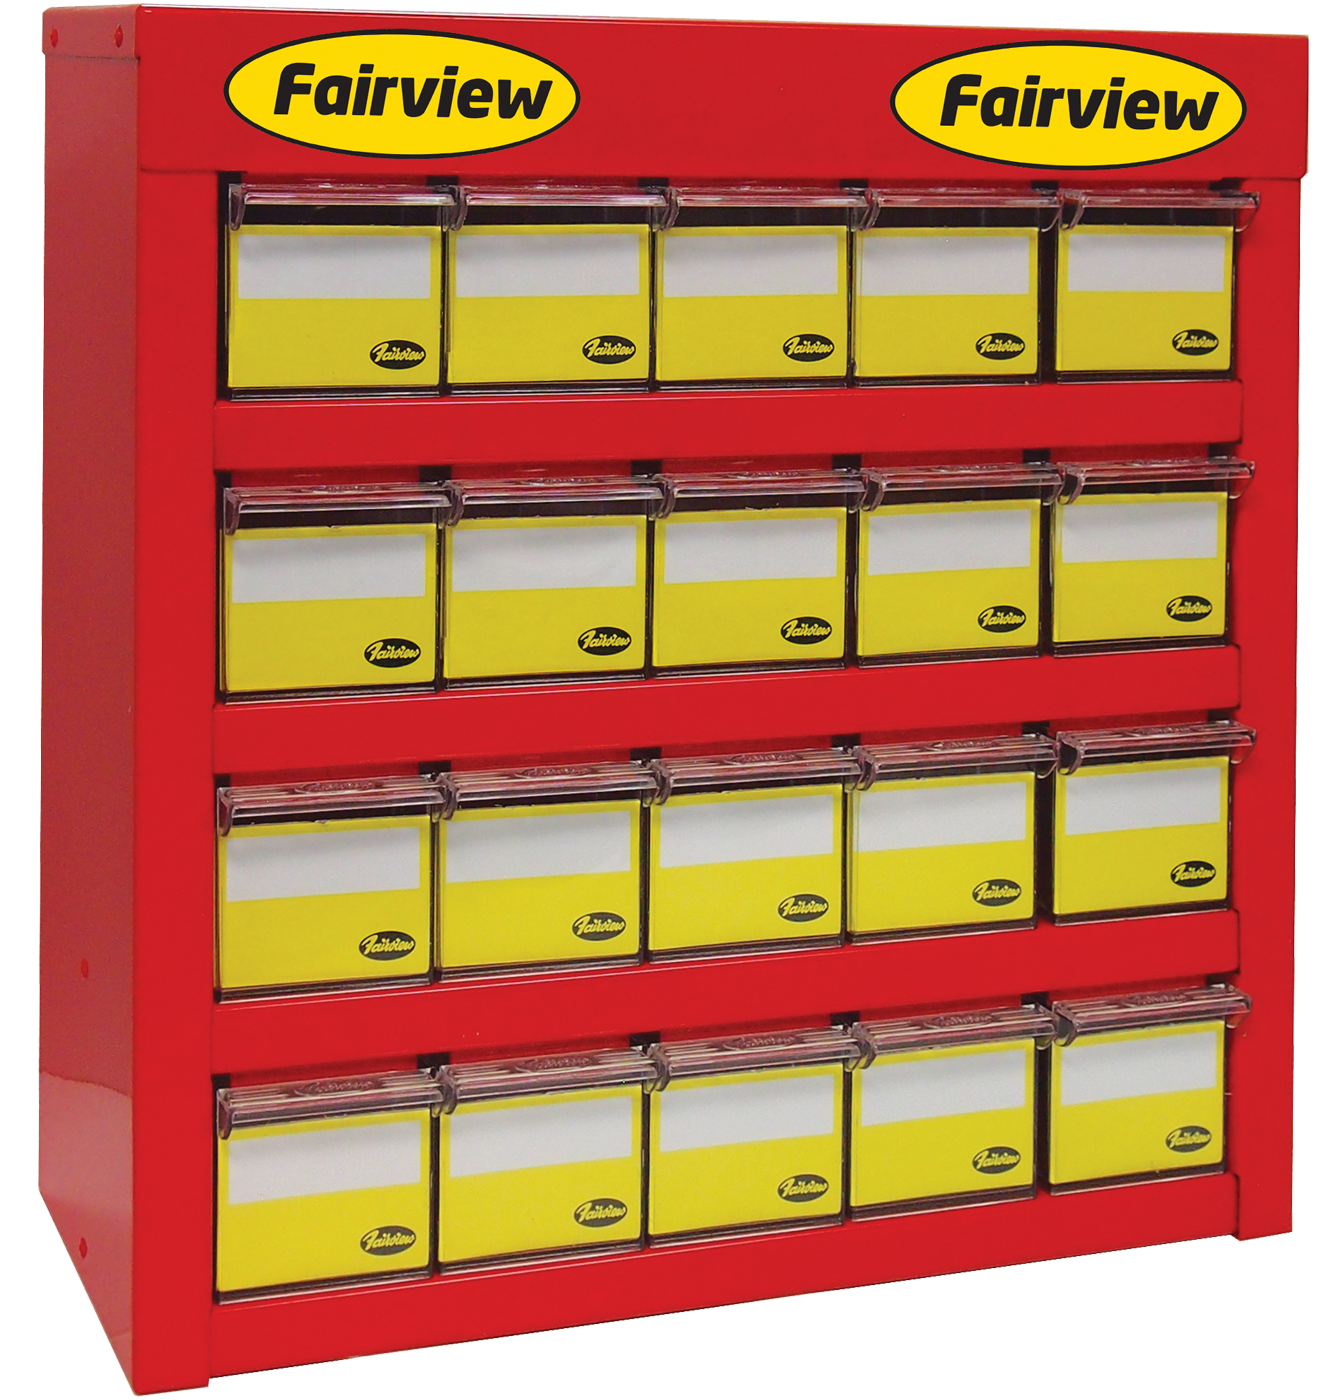 Fairview 20 Drawer Fitting Cabinet Item #: FVF-XB20-CA | RogueFuel.ca